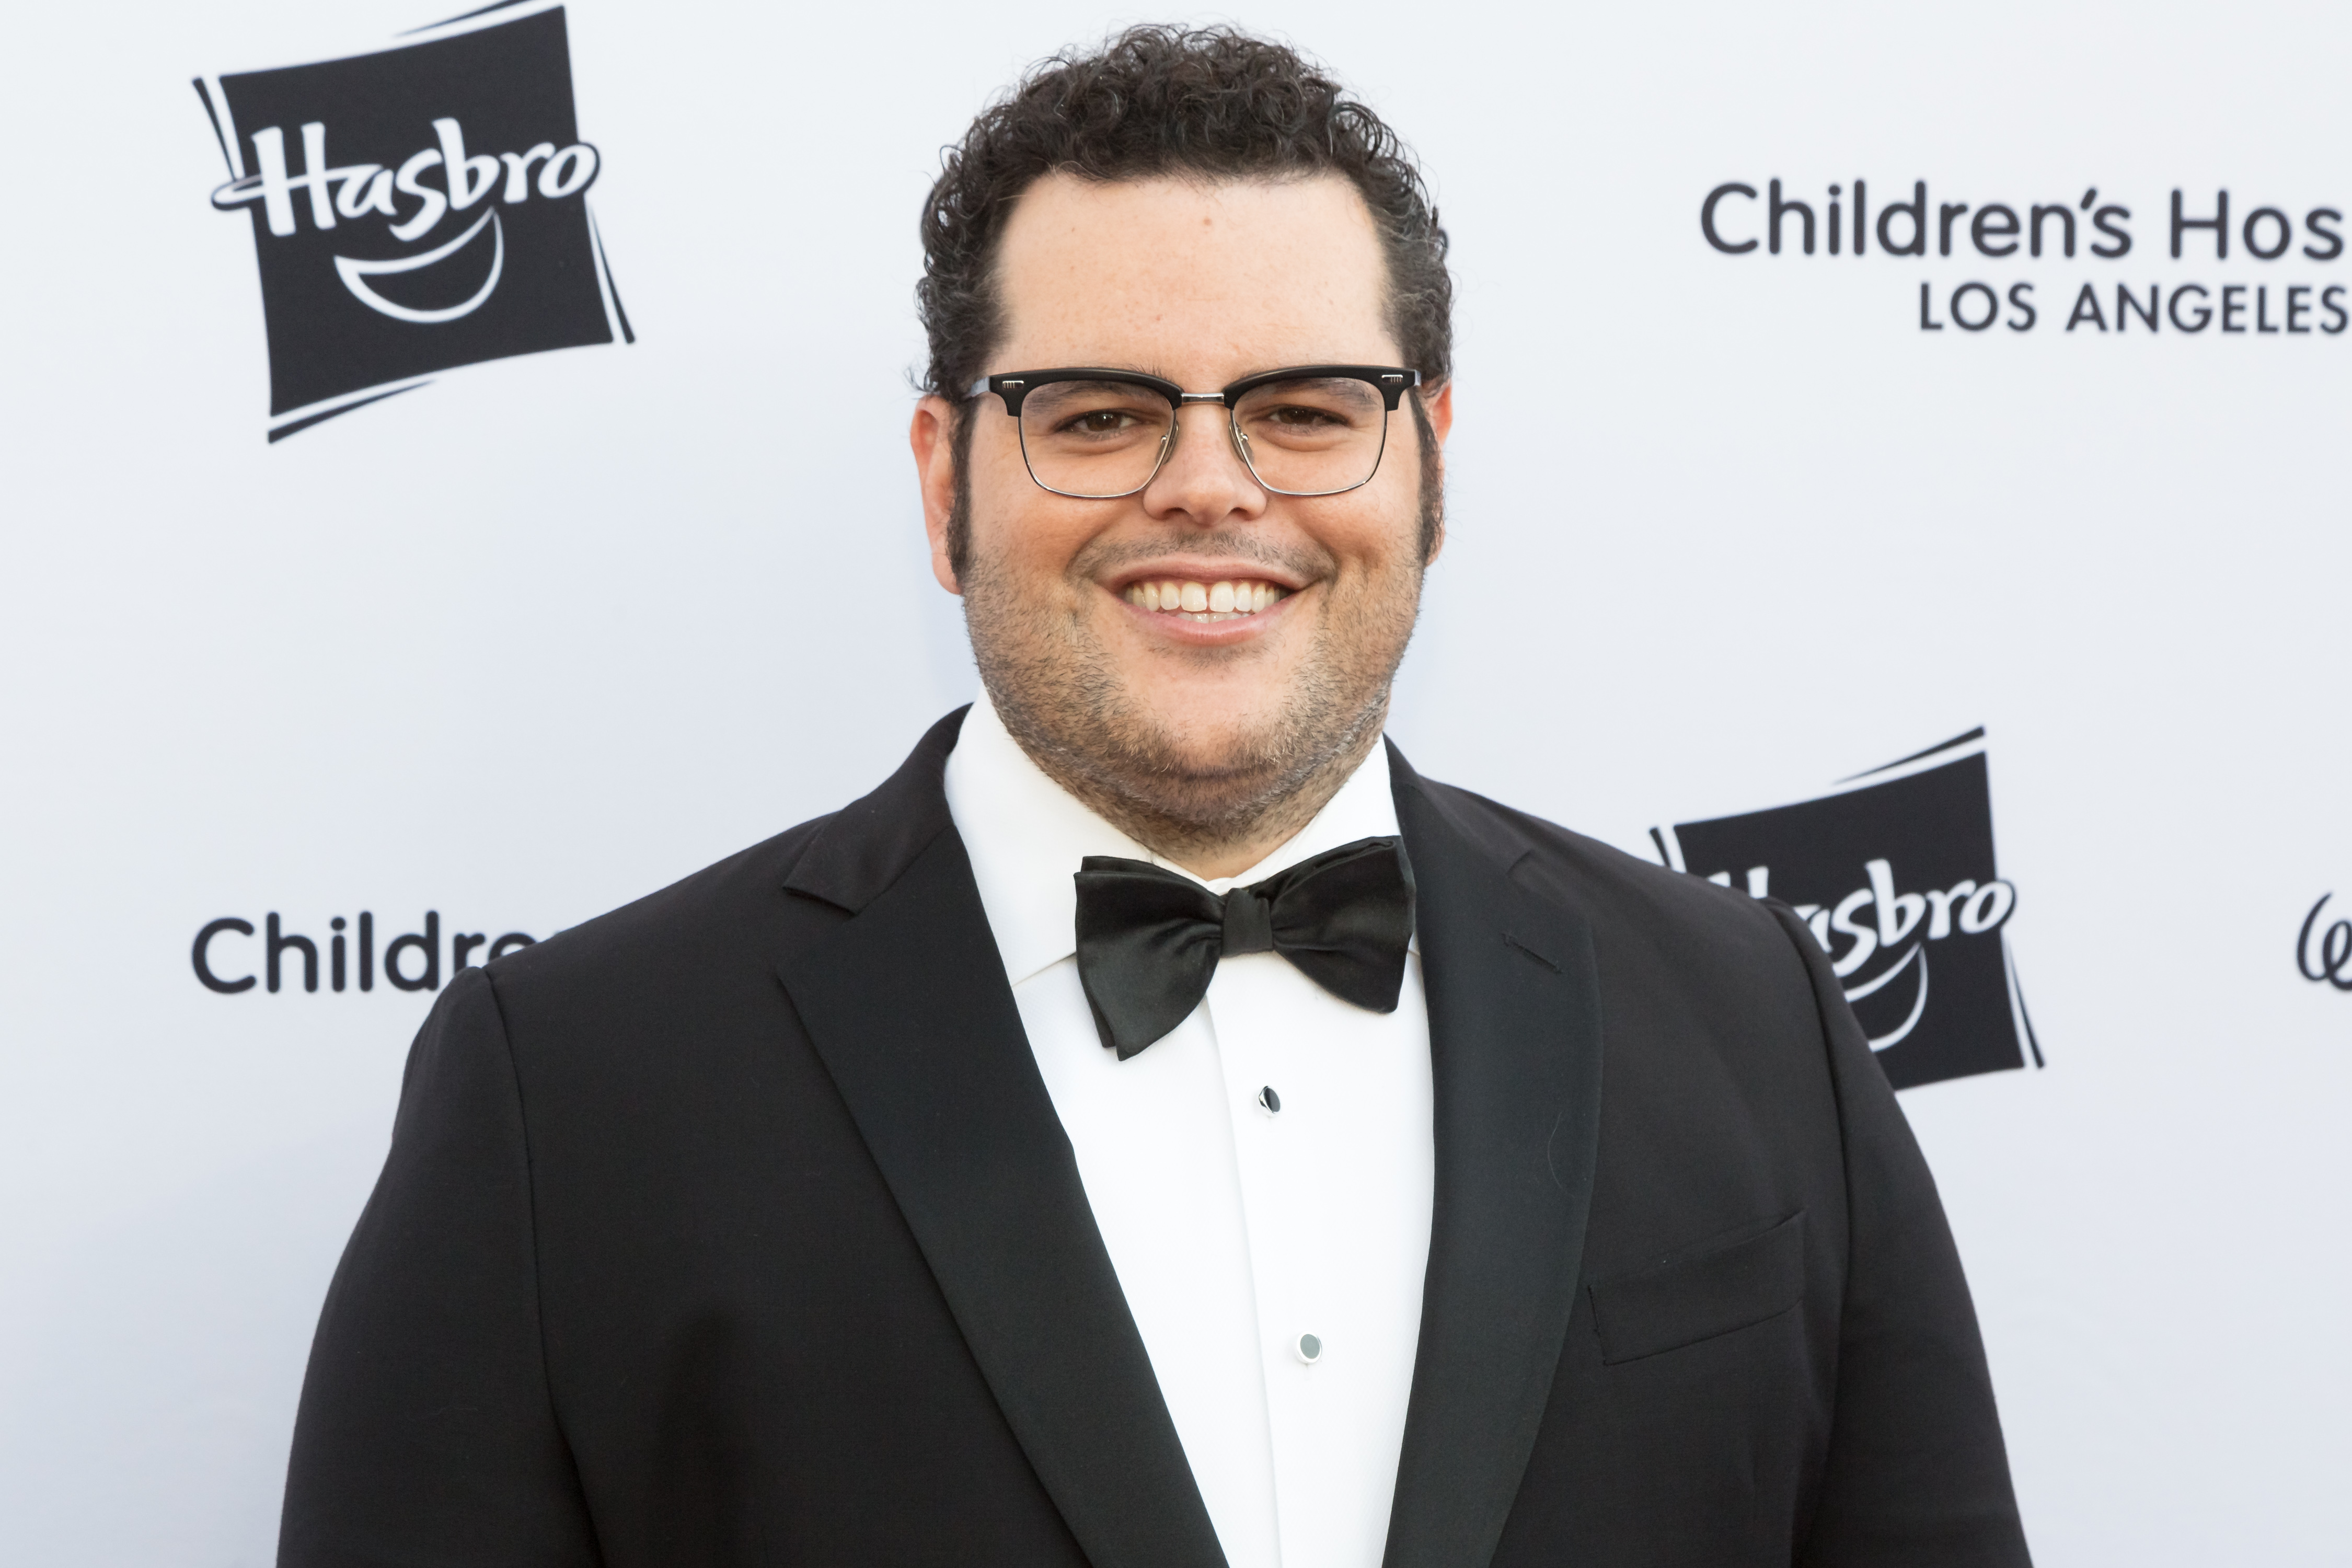 LOS ANGELES, CA - OCTOBER 20: Josh Gad attends 2018 From Paris With Love Children's Hospital Los Angeles Gala at L.A. Live Event Deck on October 20, 2018 in Los Angeles, California. (Photo by Greg Doherty/WireImage) (Greg Doherty—WireImage)